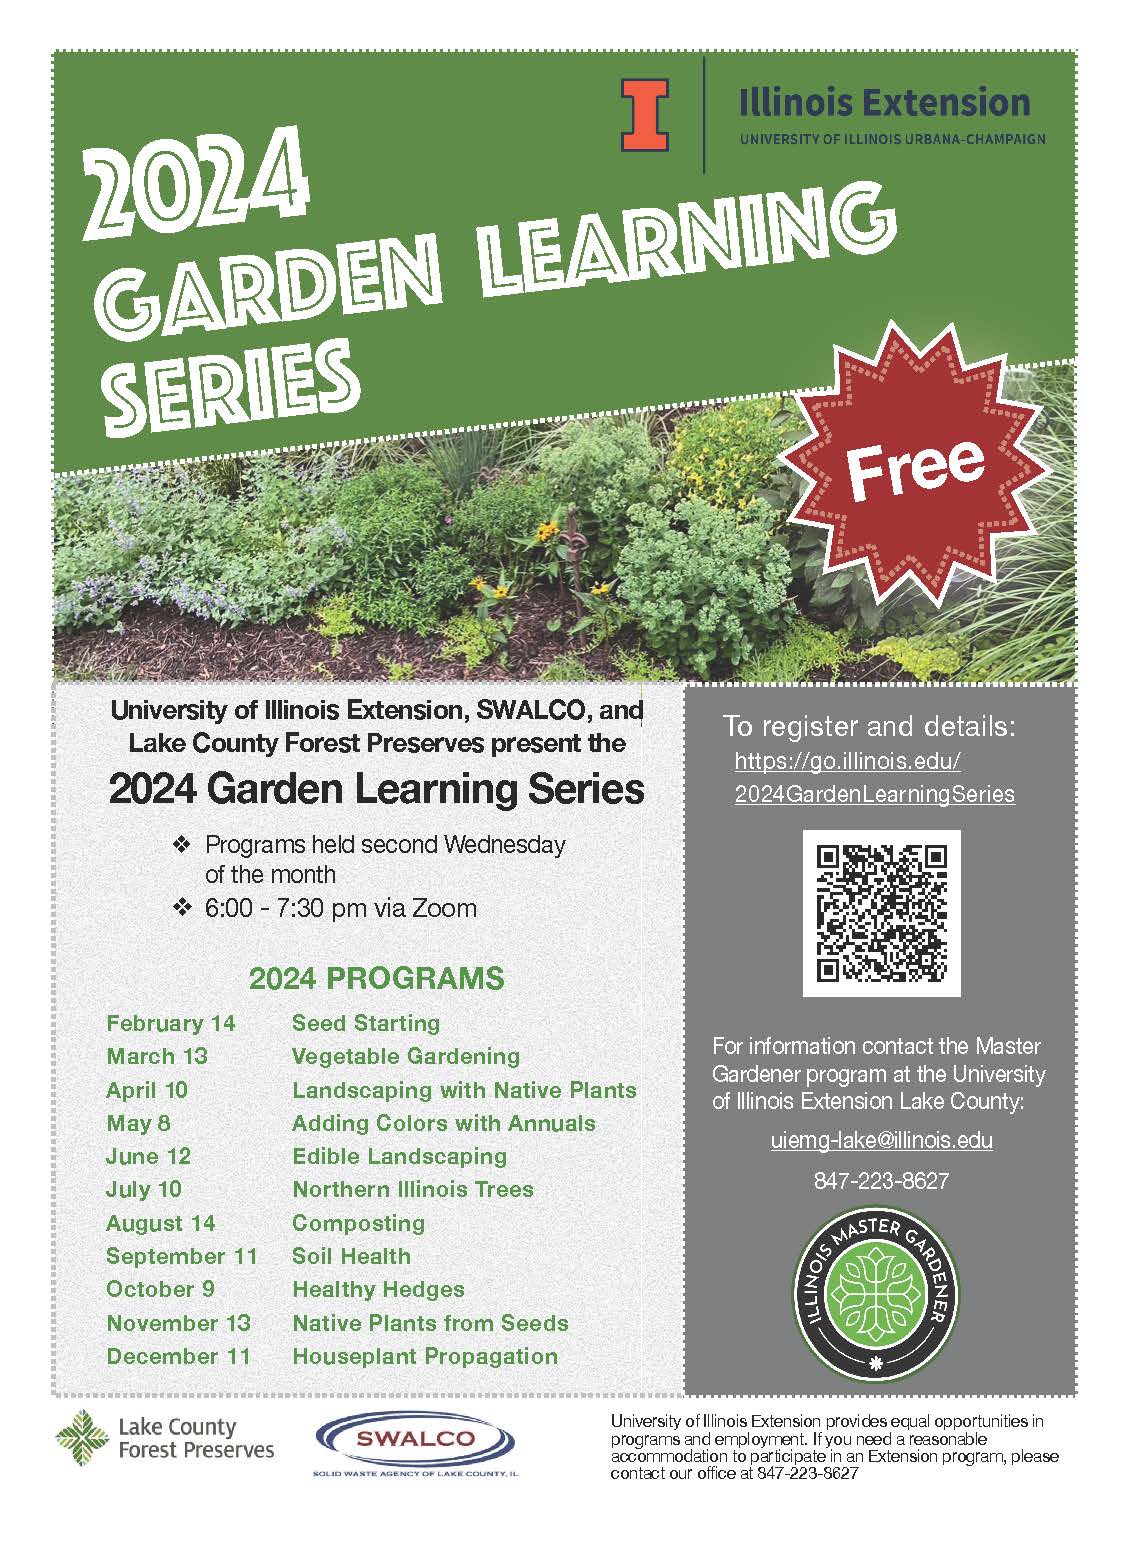 “Landscaping with Native Plants” on April 10